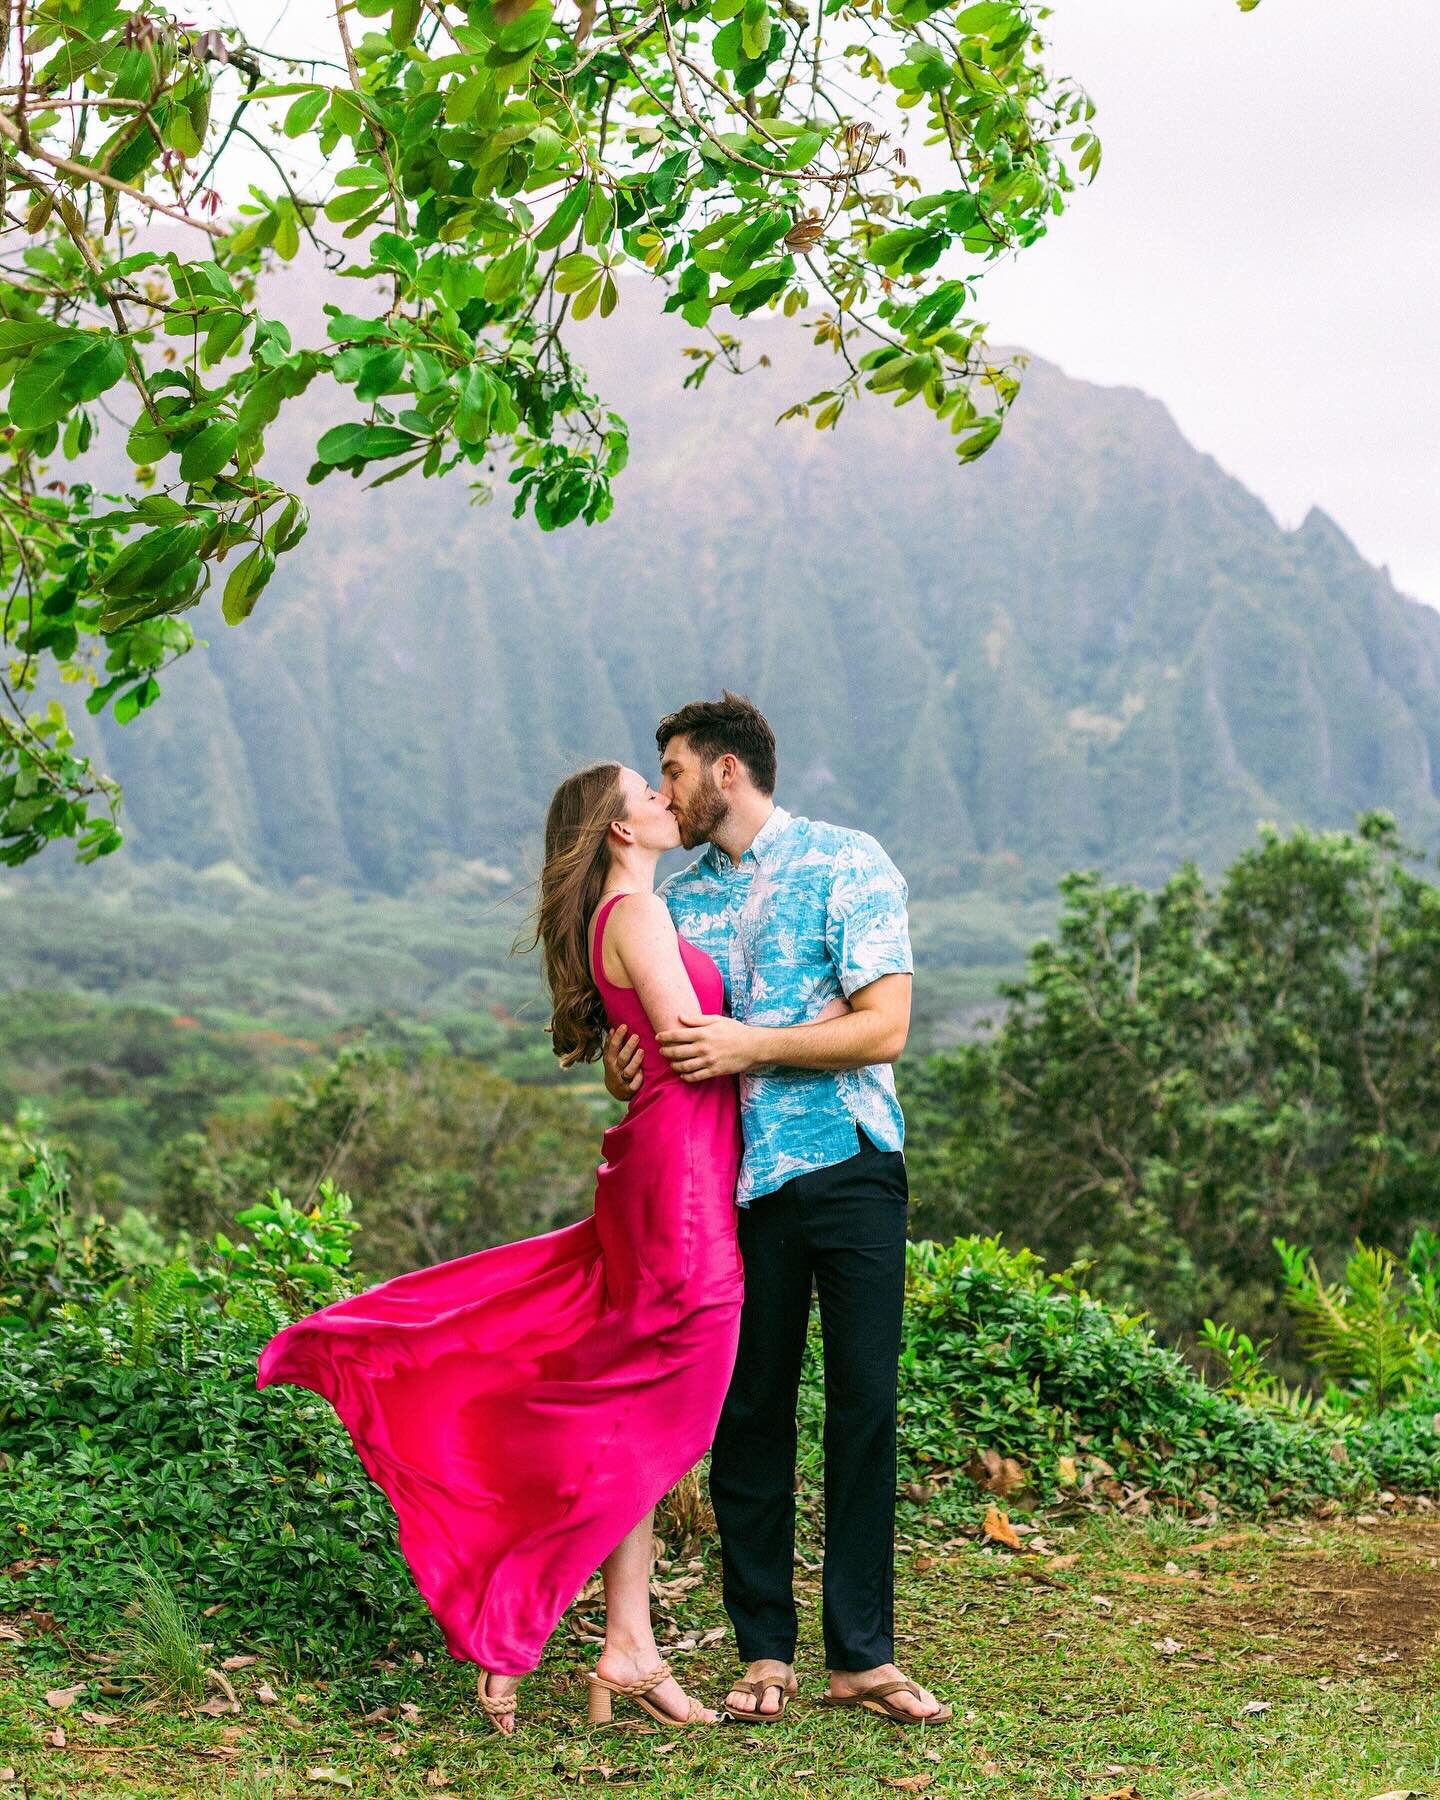 Kelly &amp; Ward&rsquo;s garden #engagement has us swept away 🩷 We can&rsquo;t wait to capture their wedding in Spring of 2025! 
.
.
.
.
.
#absolutelyloved #absolutelylovedphotography #absolutelylovedengagement #springengagement #hawaiiweddingphotog